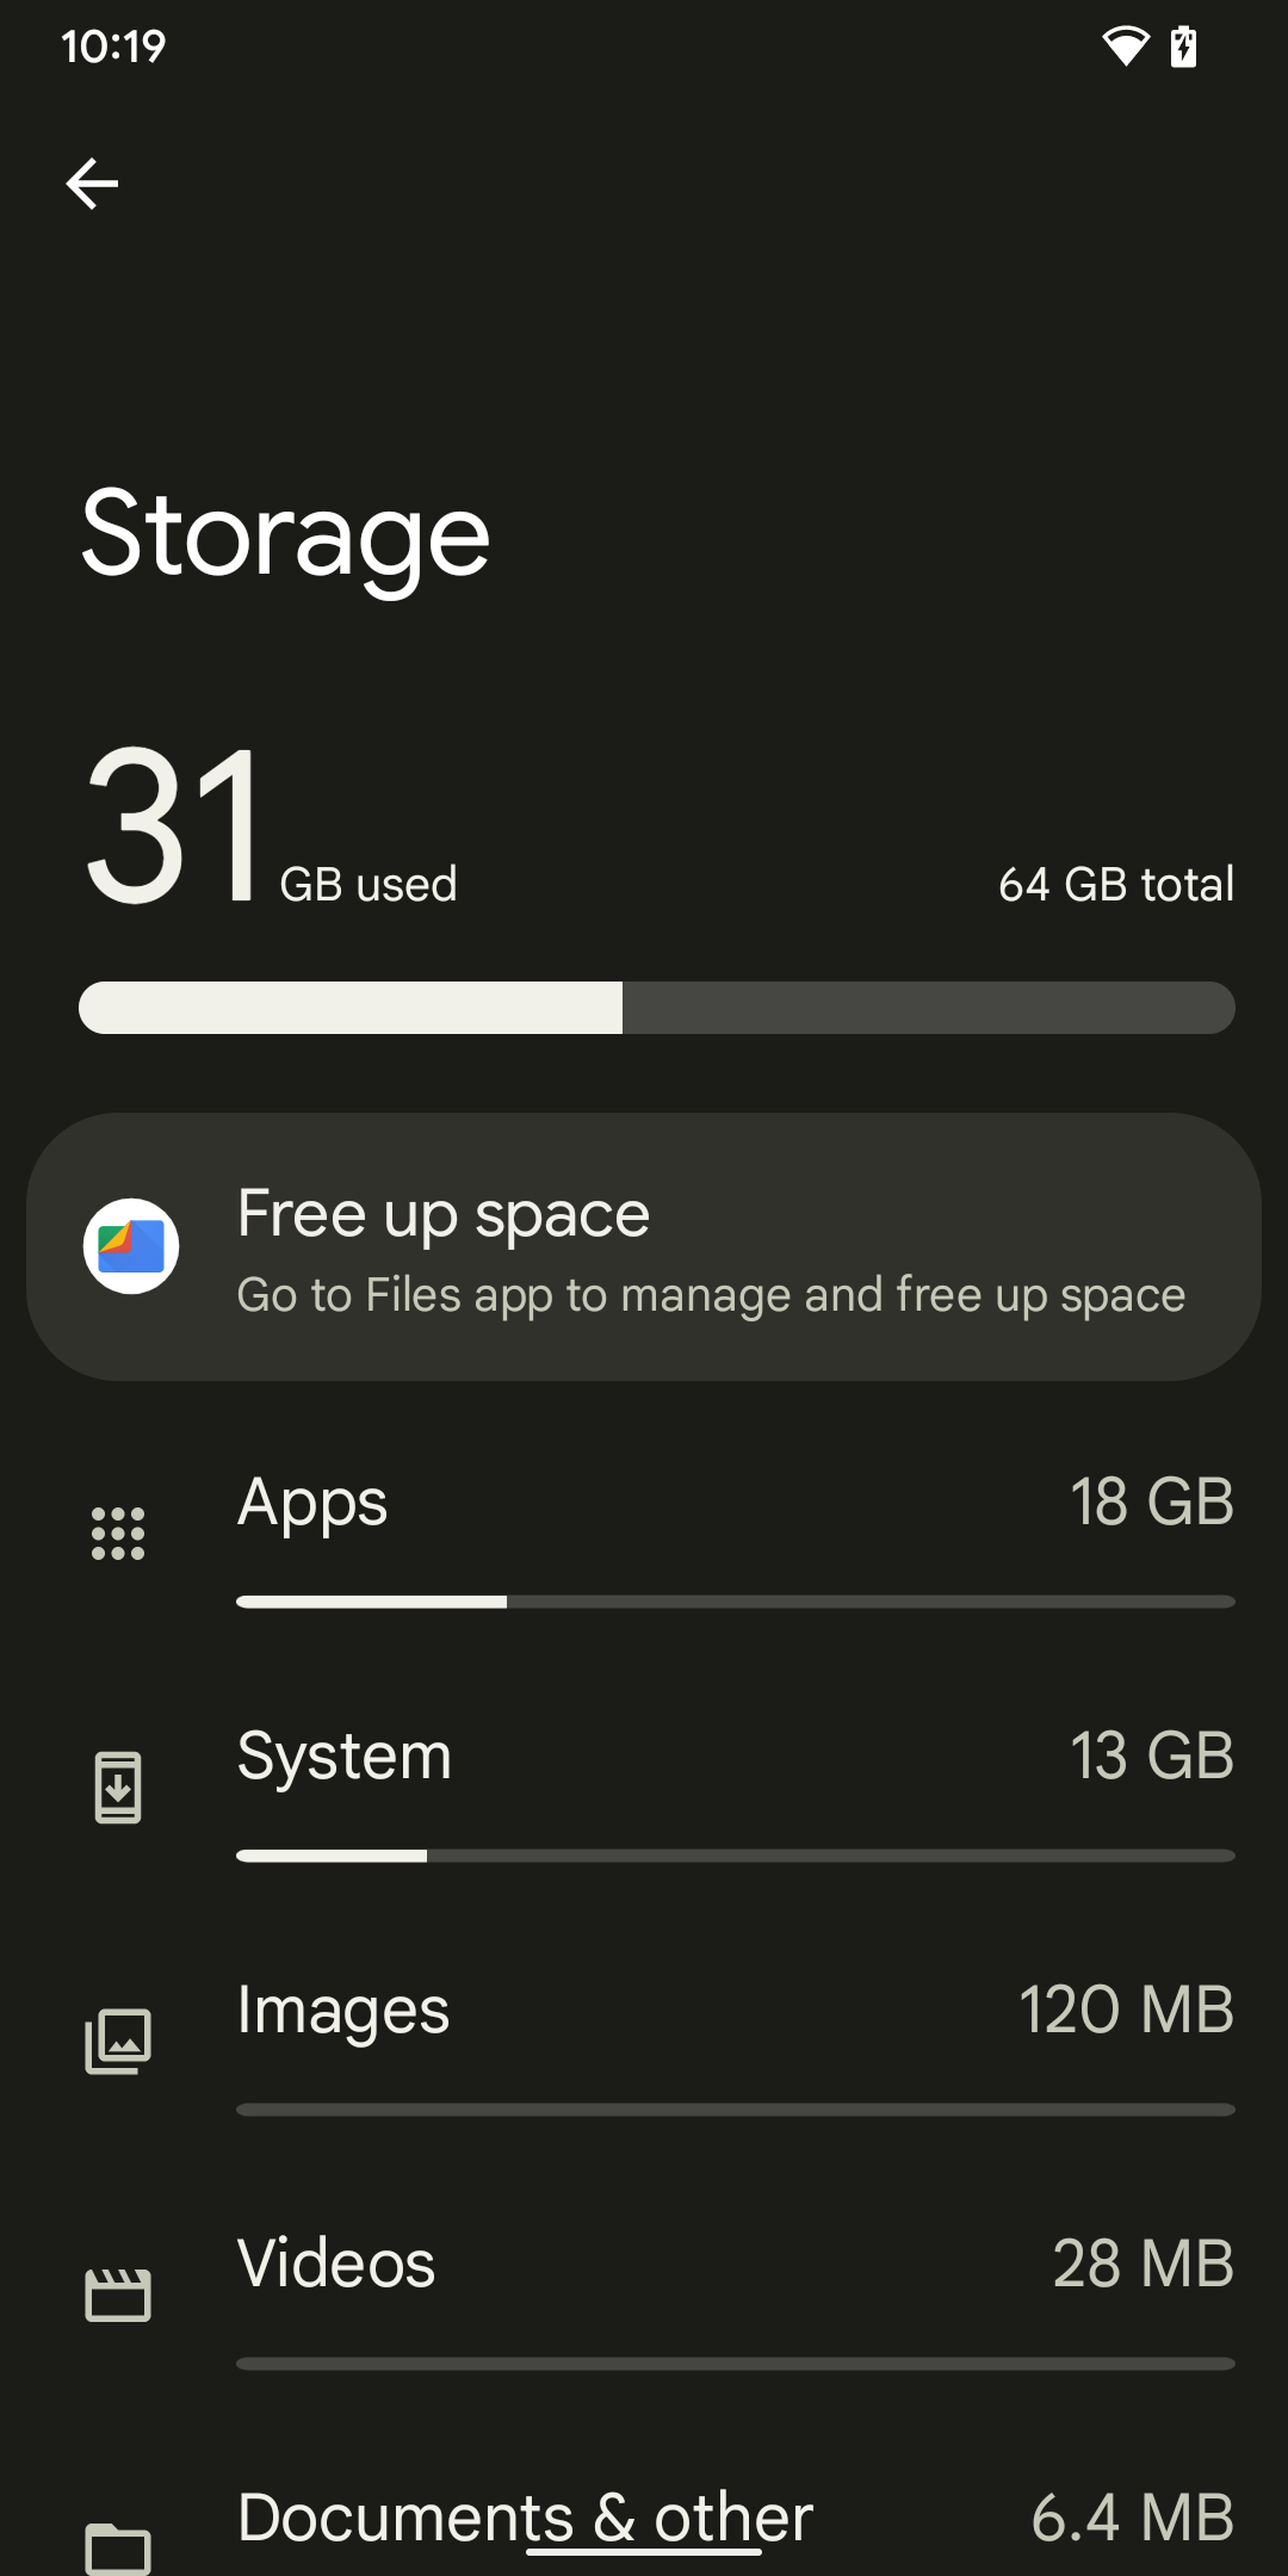 Tap on the “Free up space” button to help clean up your phone’s storage.